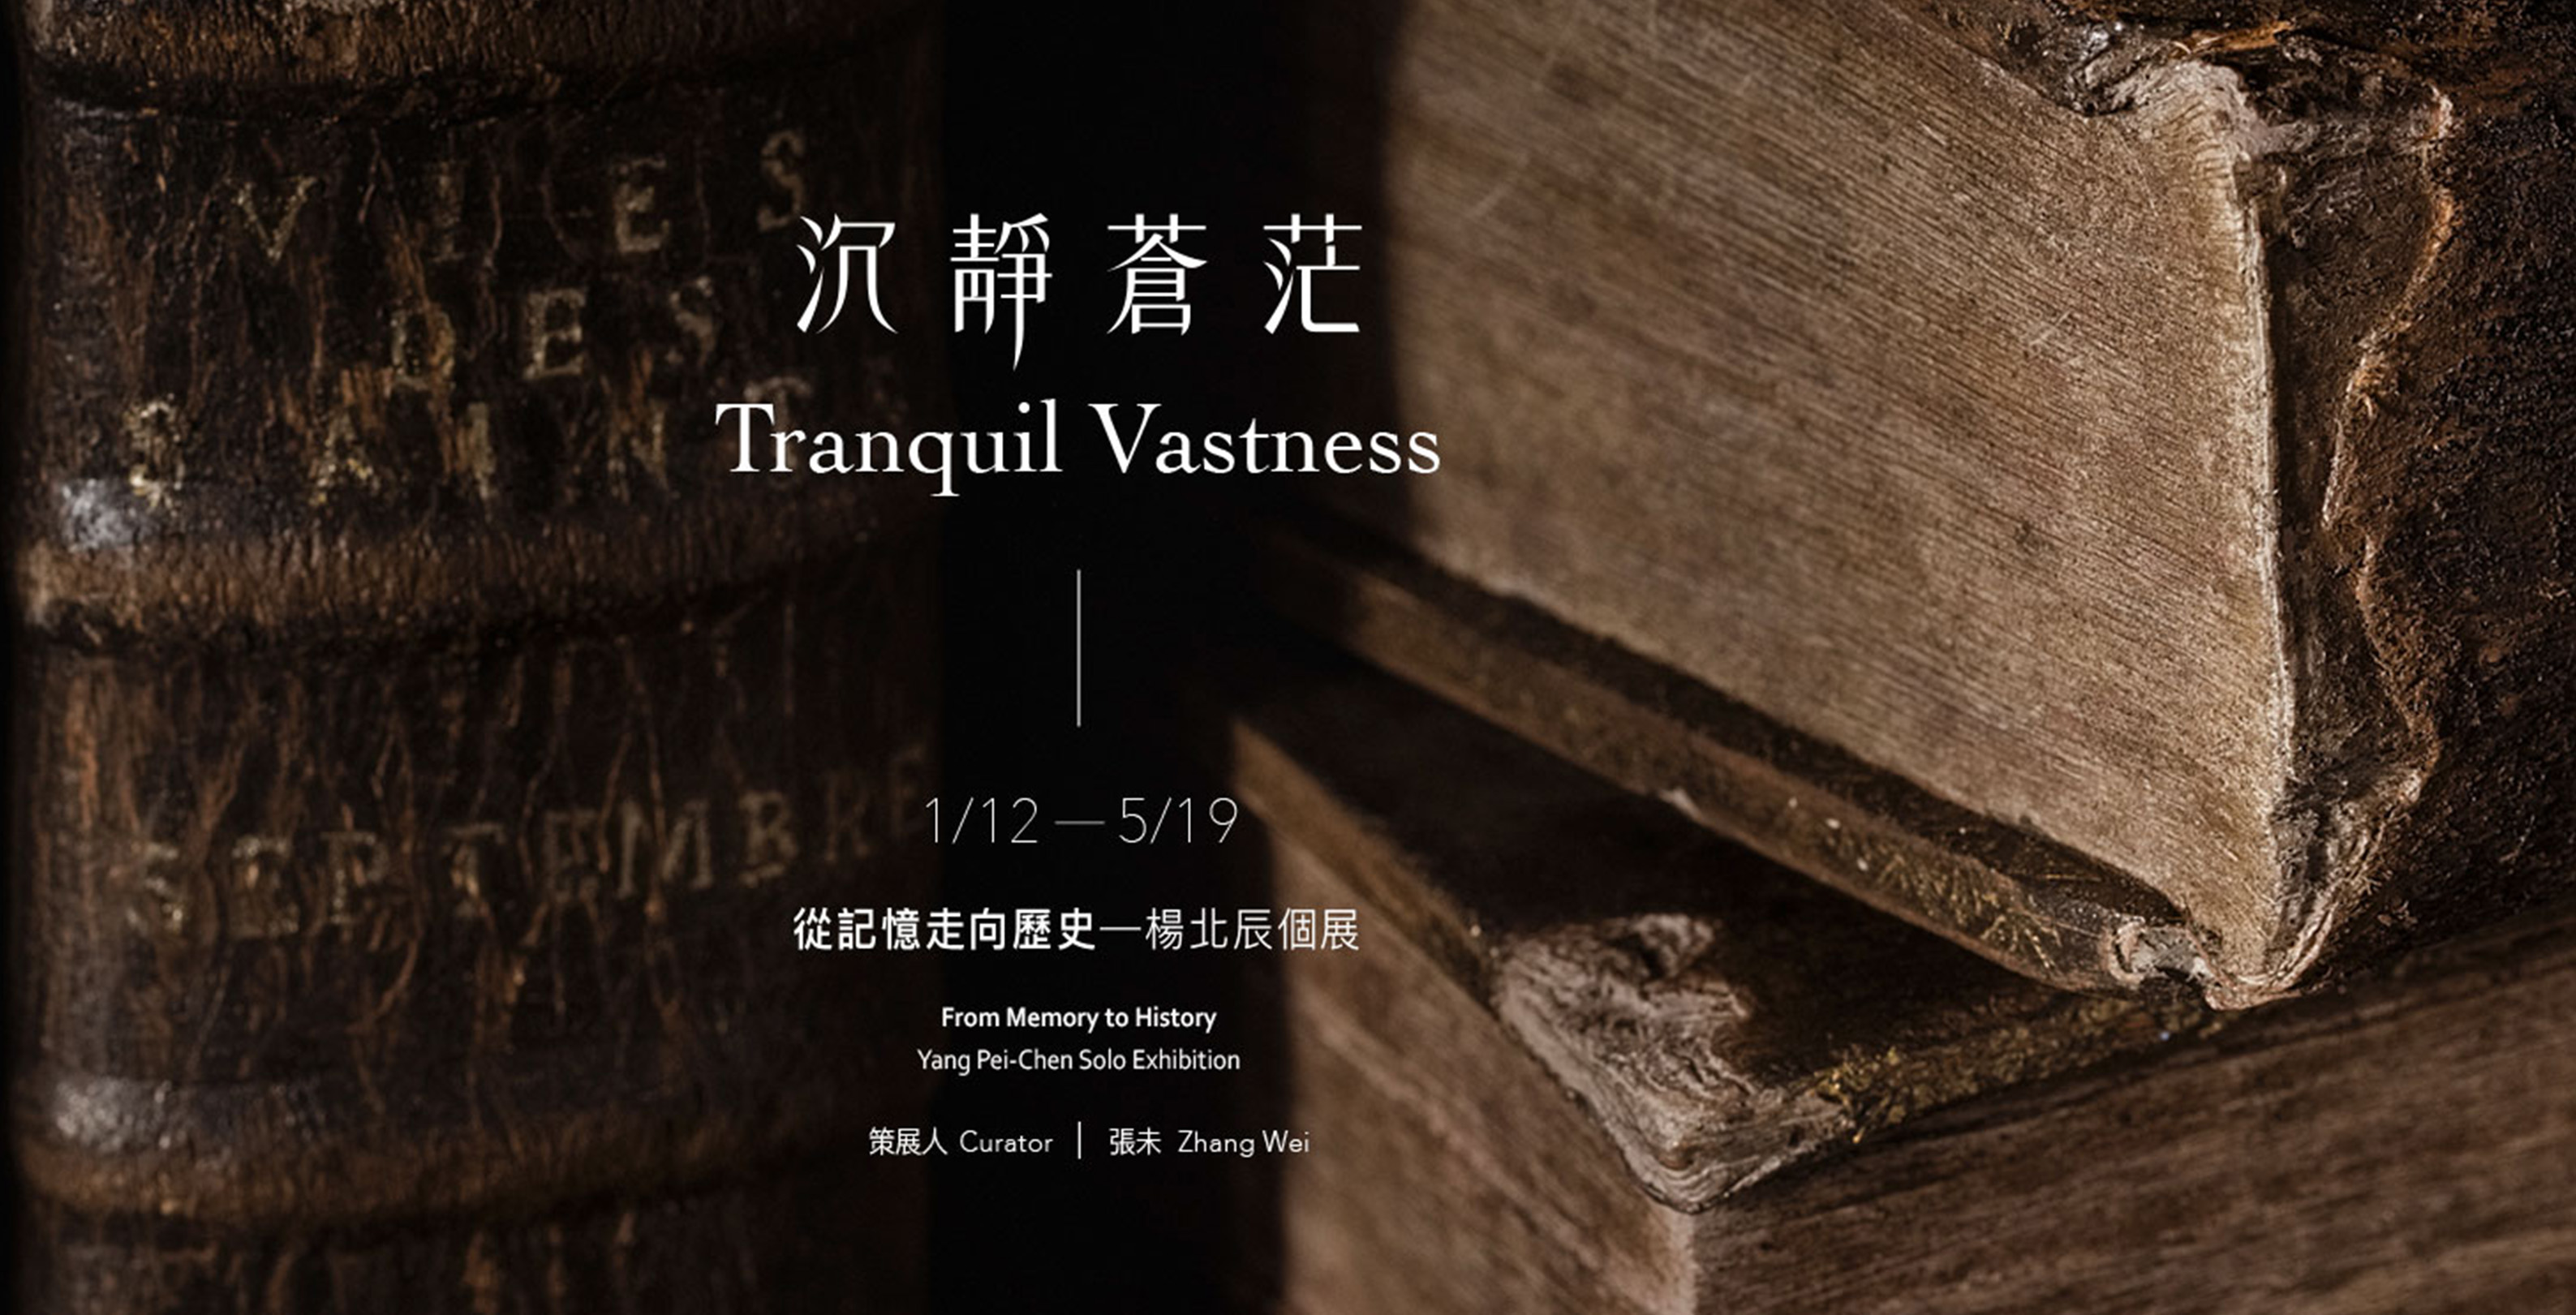 Tranquil Vastness: From Memory to History ─ Yang Pei-Chen Solo Exhibition